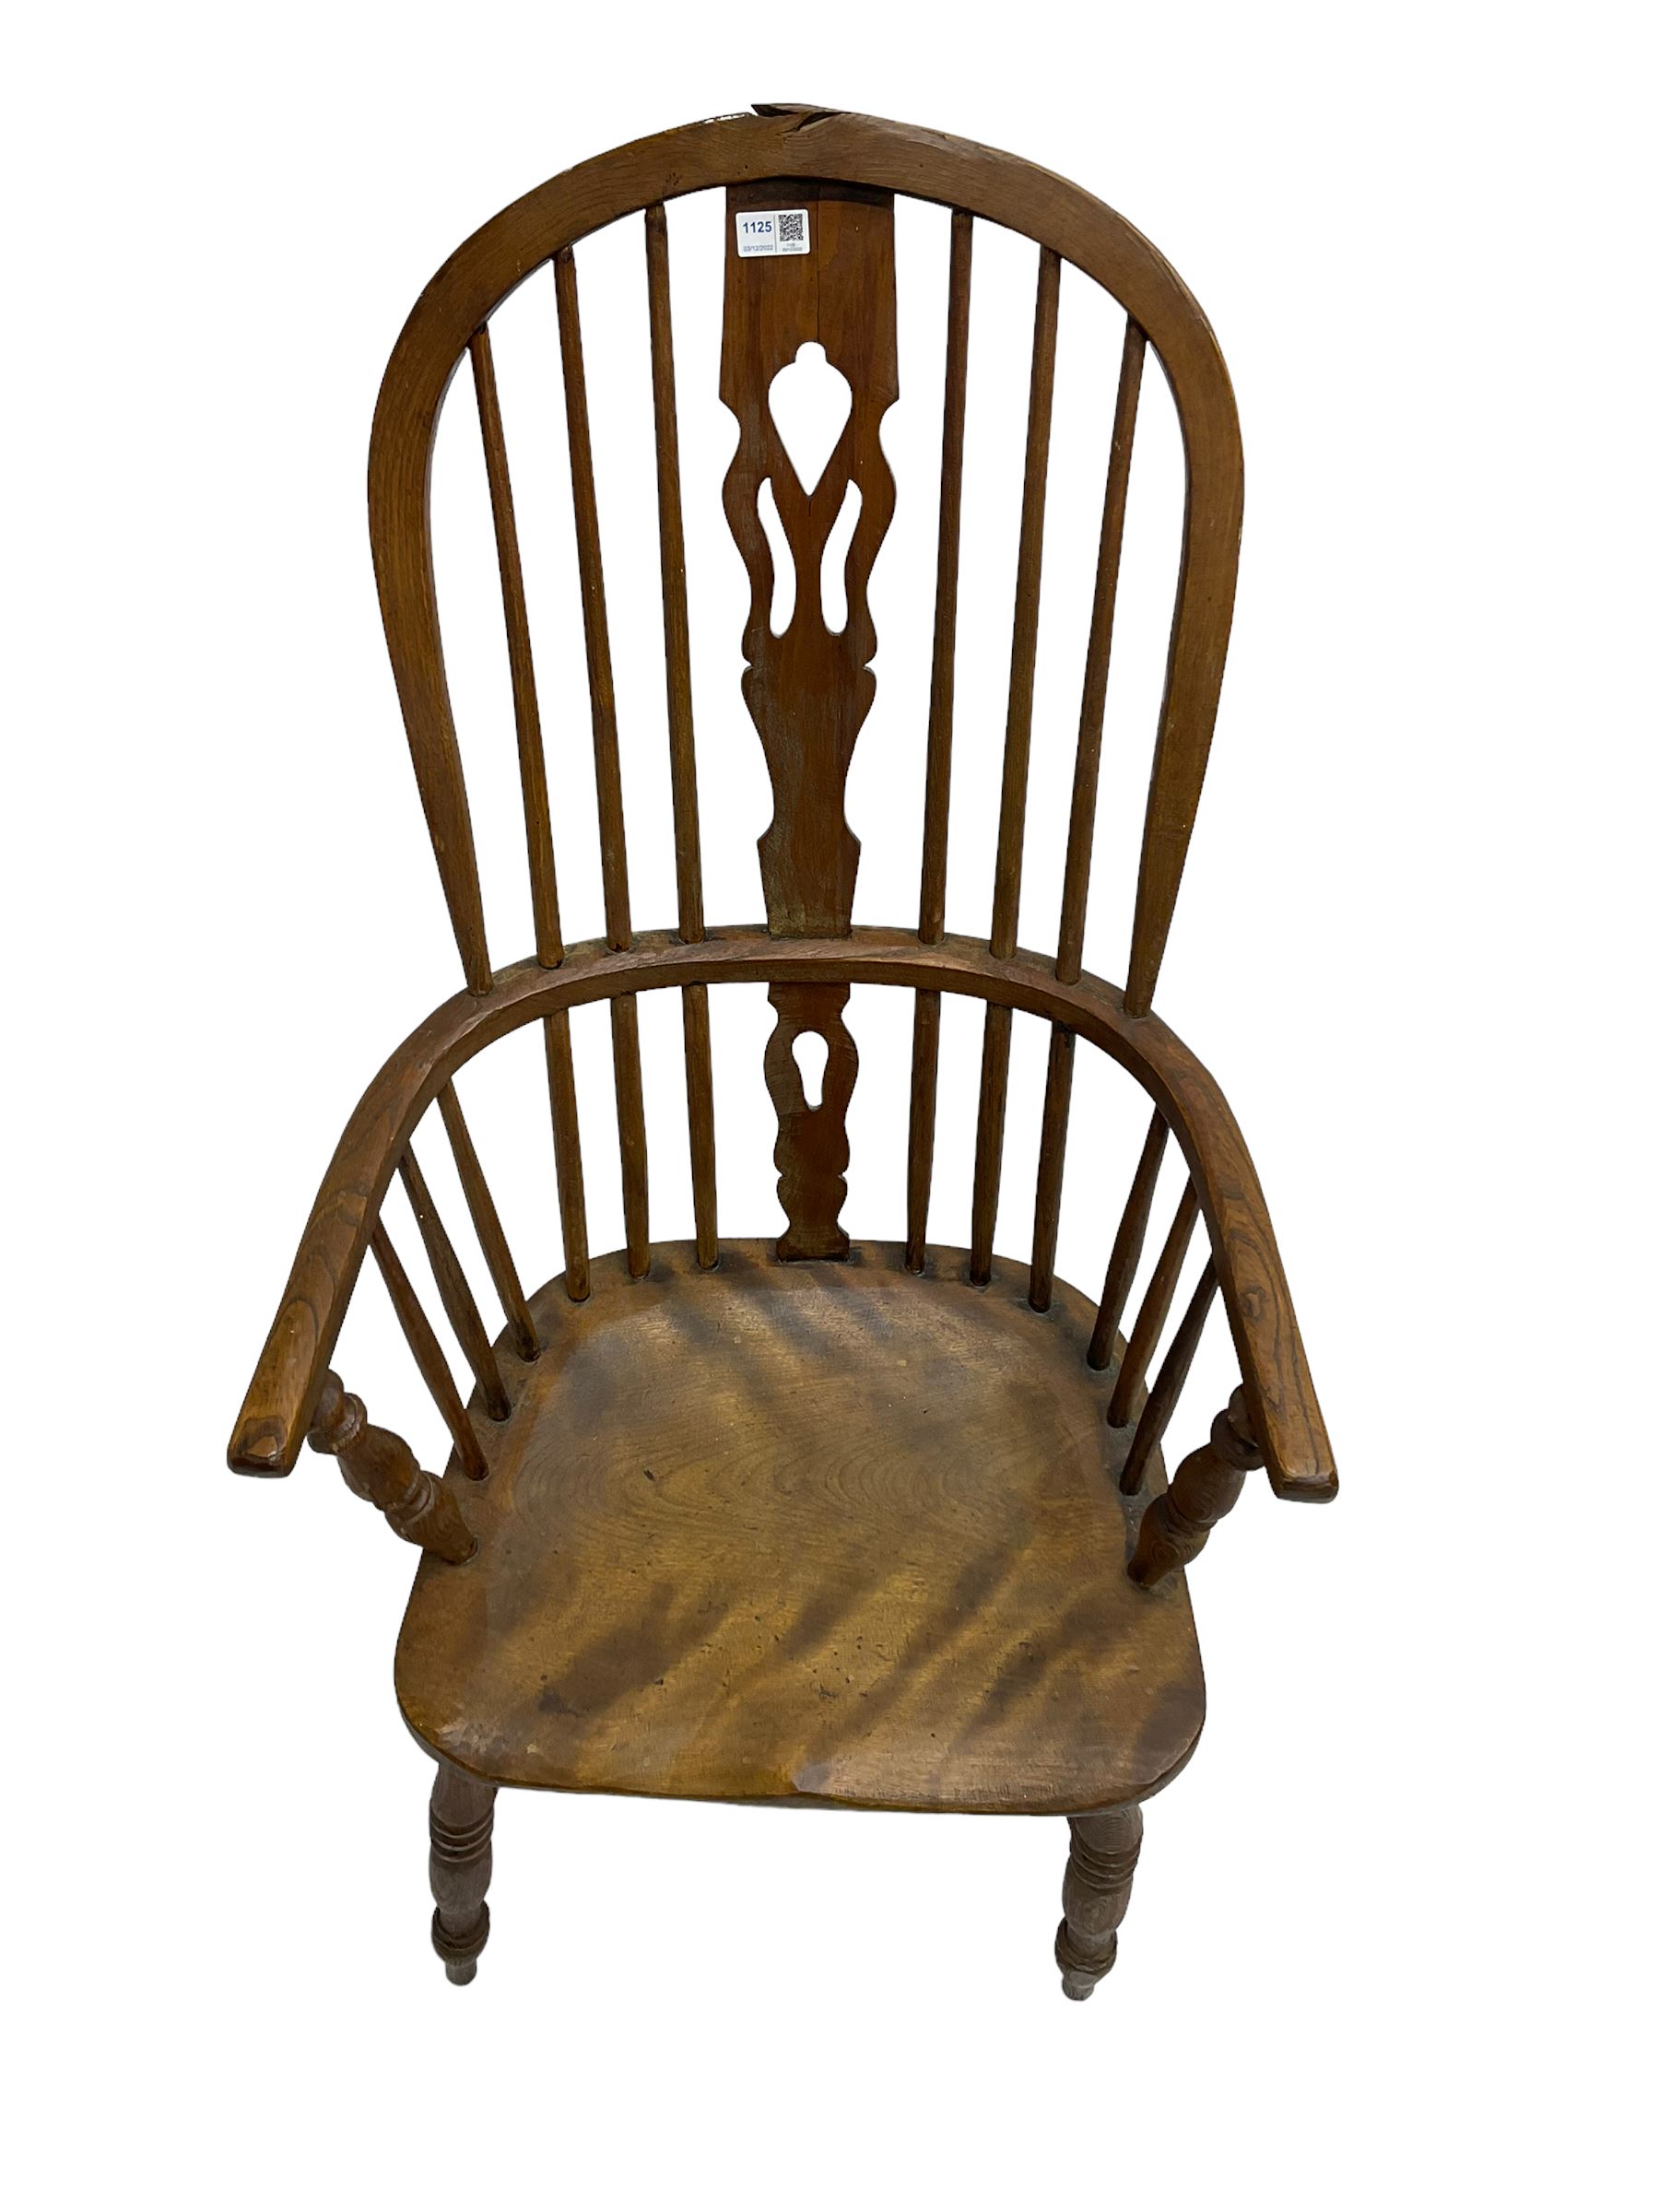 19th century elm and beech Windsor armchair - Image 2 of 6